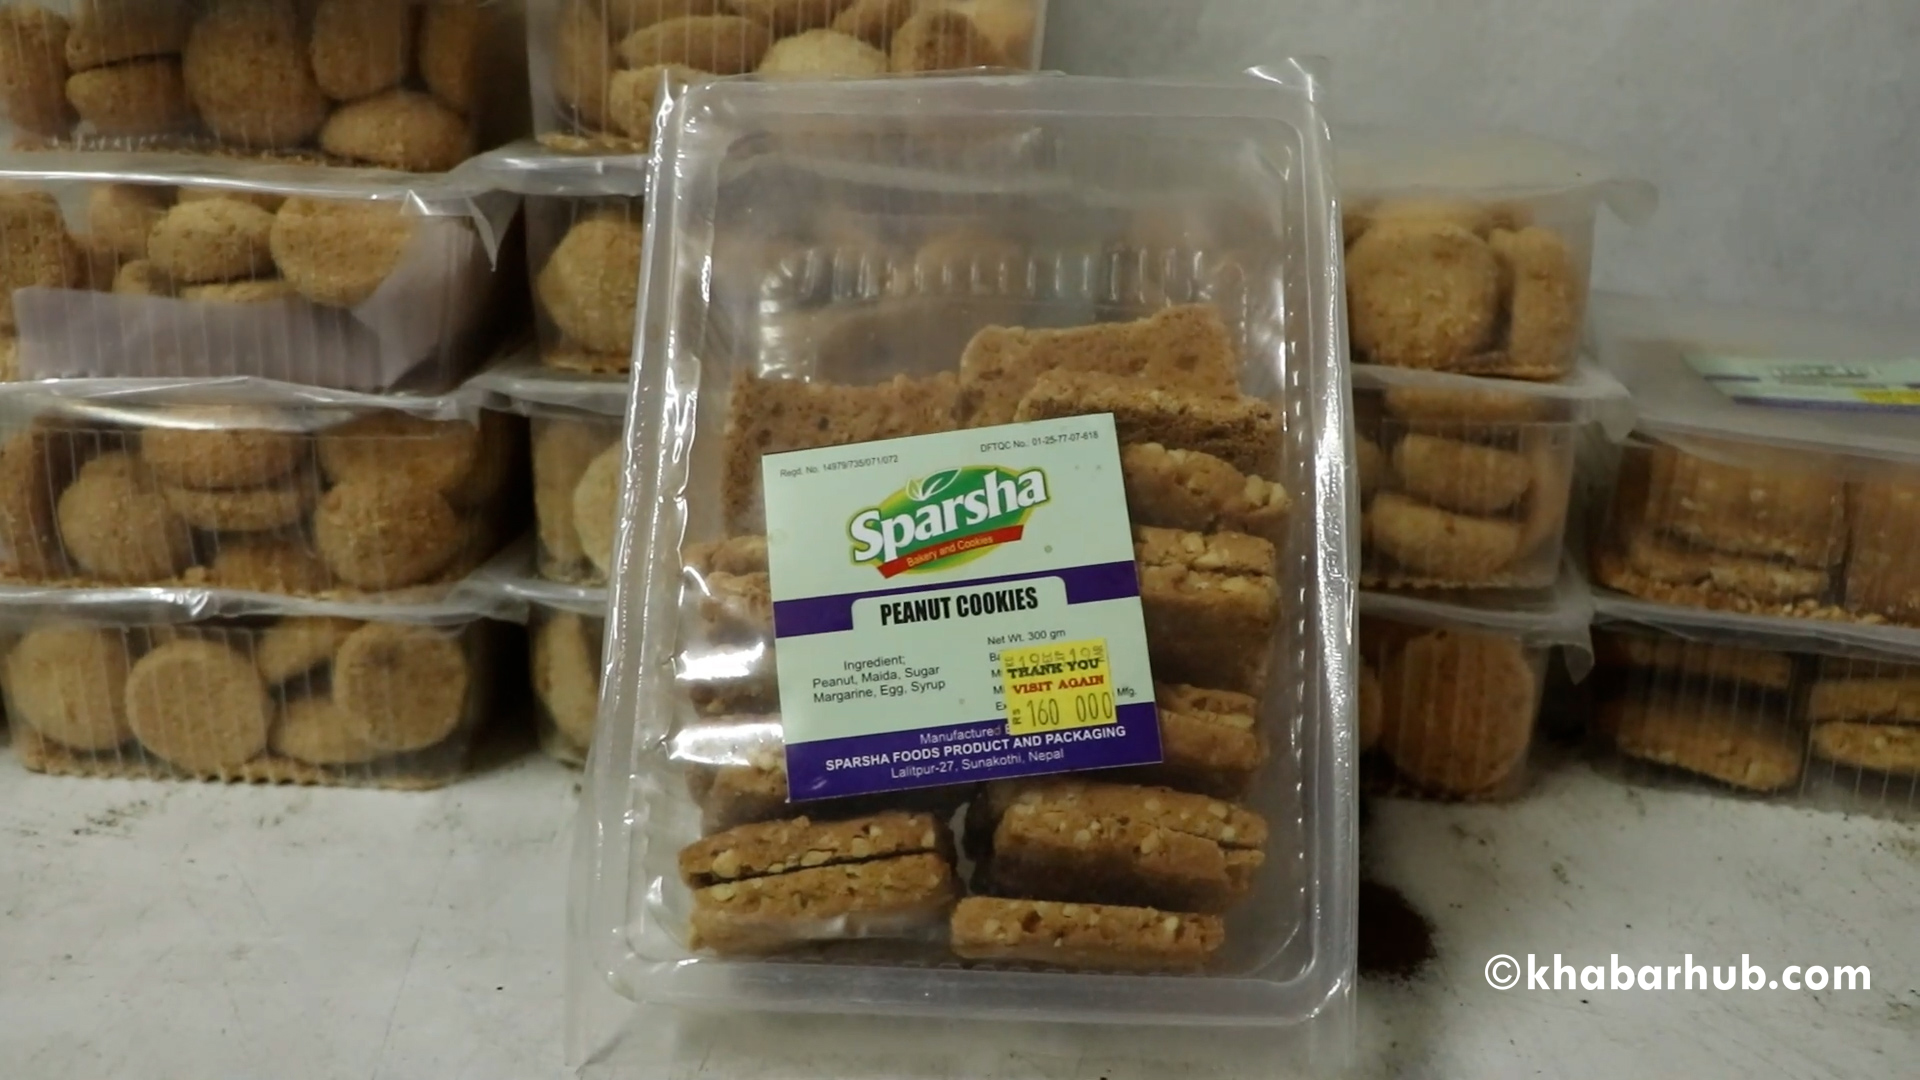 Police raid Sunakothi-based Sparsh Foods; company found using highly unethical standard for making bakery items